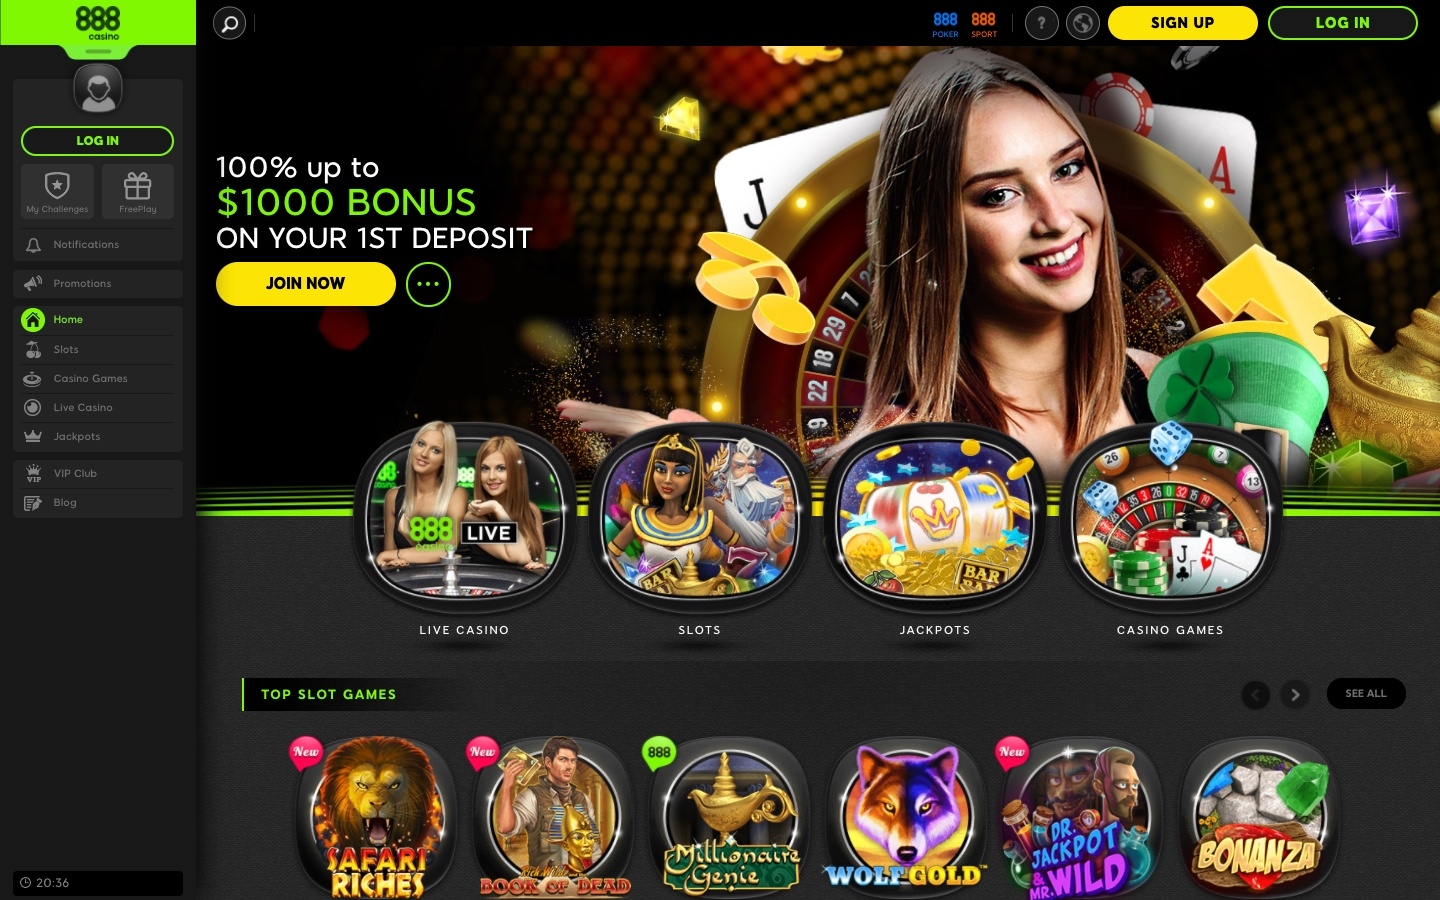 What Makes 888 Casino Stand Out From The Rest?